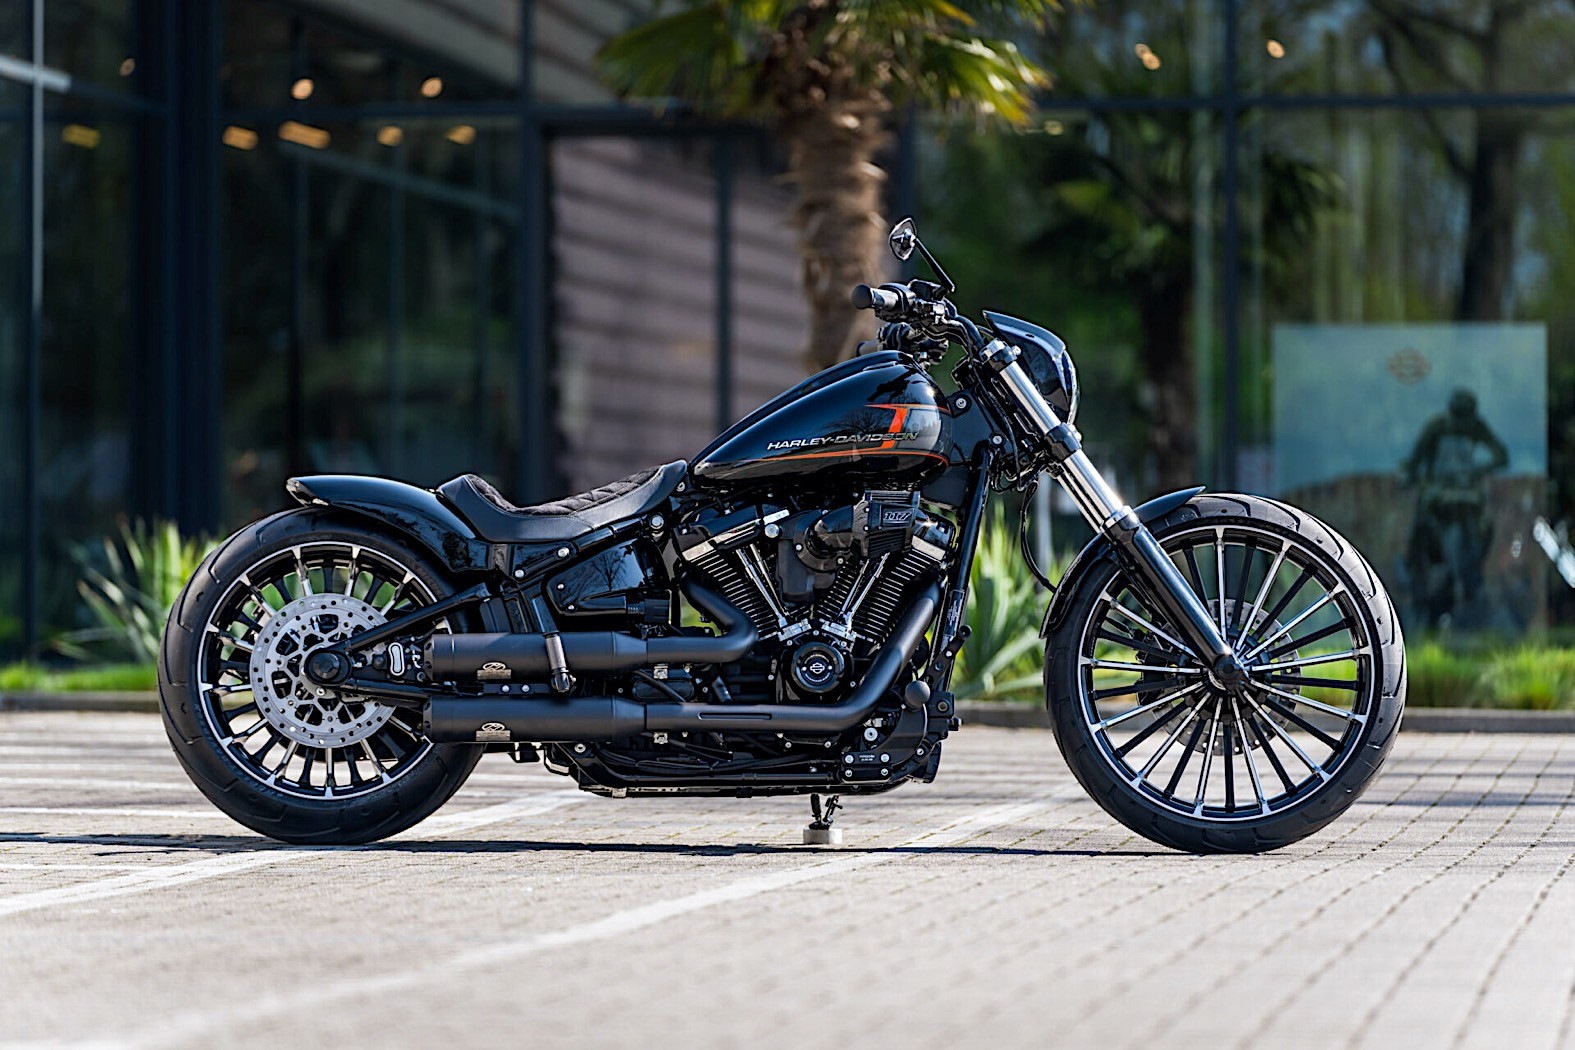 HarleyDavidson Devil 23 Could Very Well Be the World's First Custom